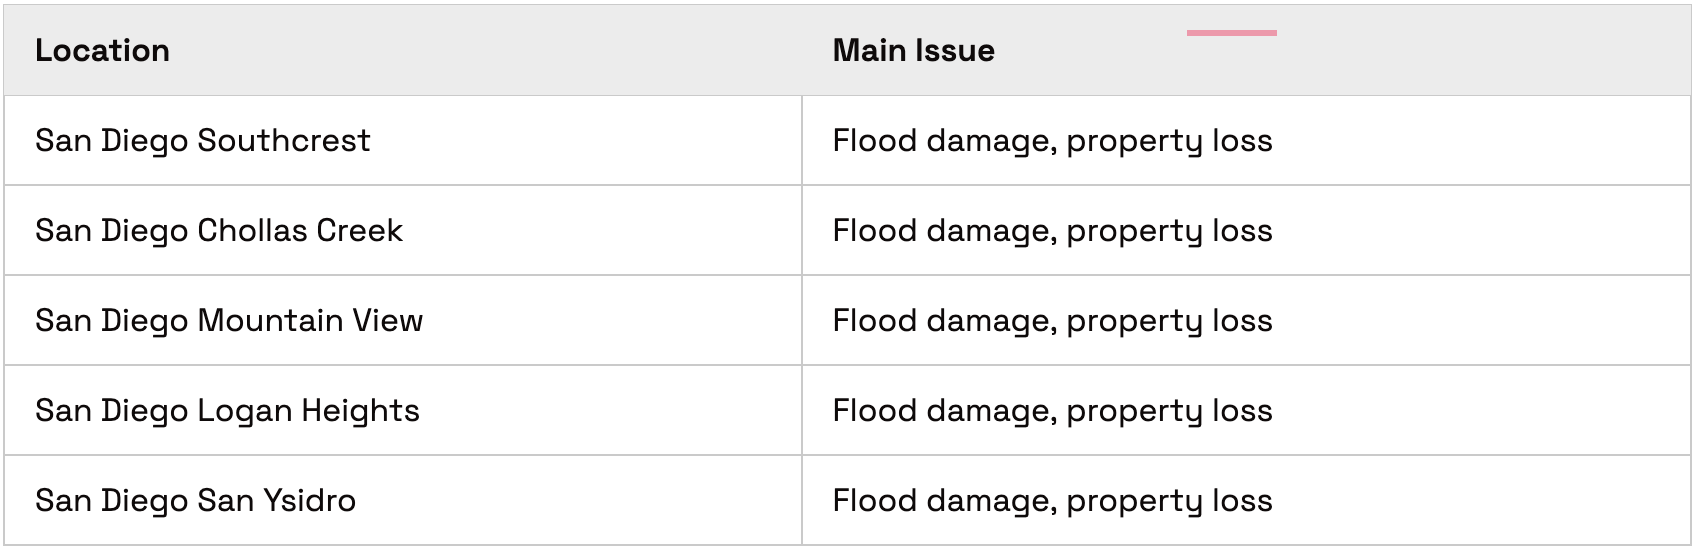 Flood damage and property loss hotzones